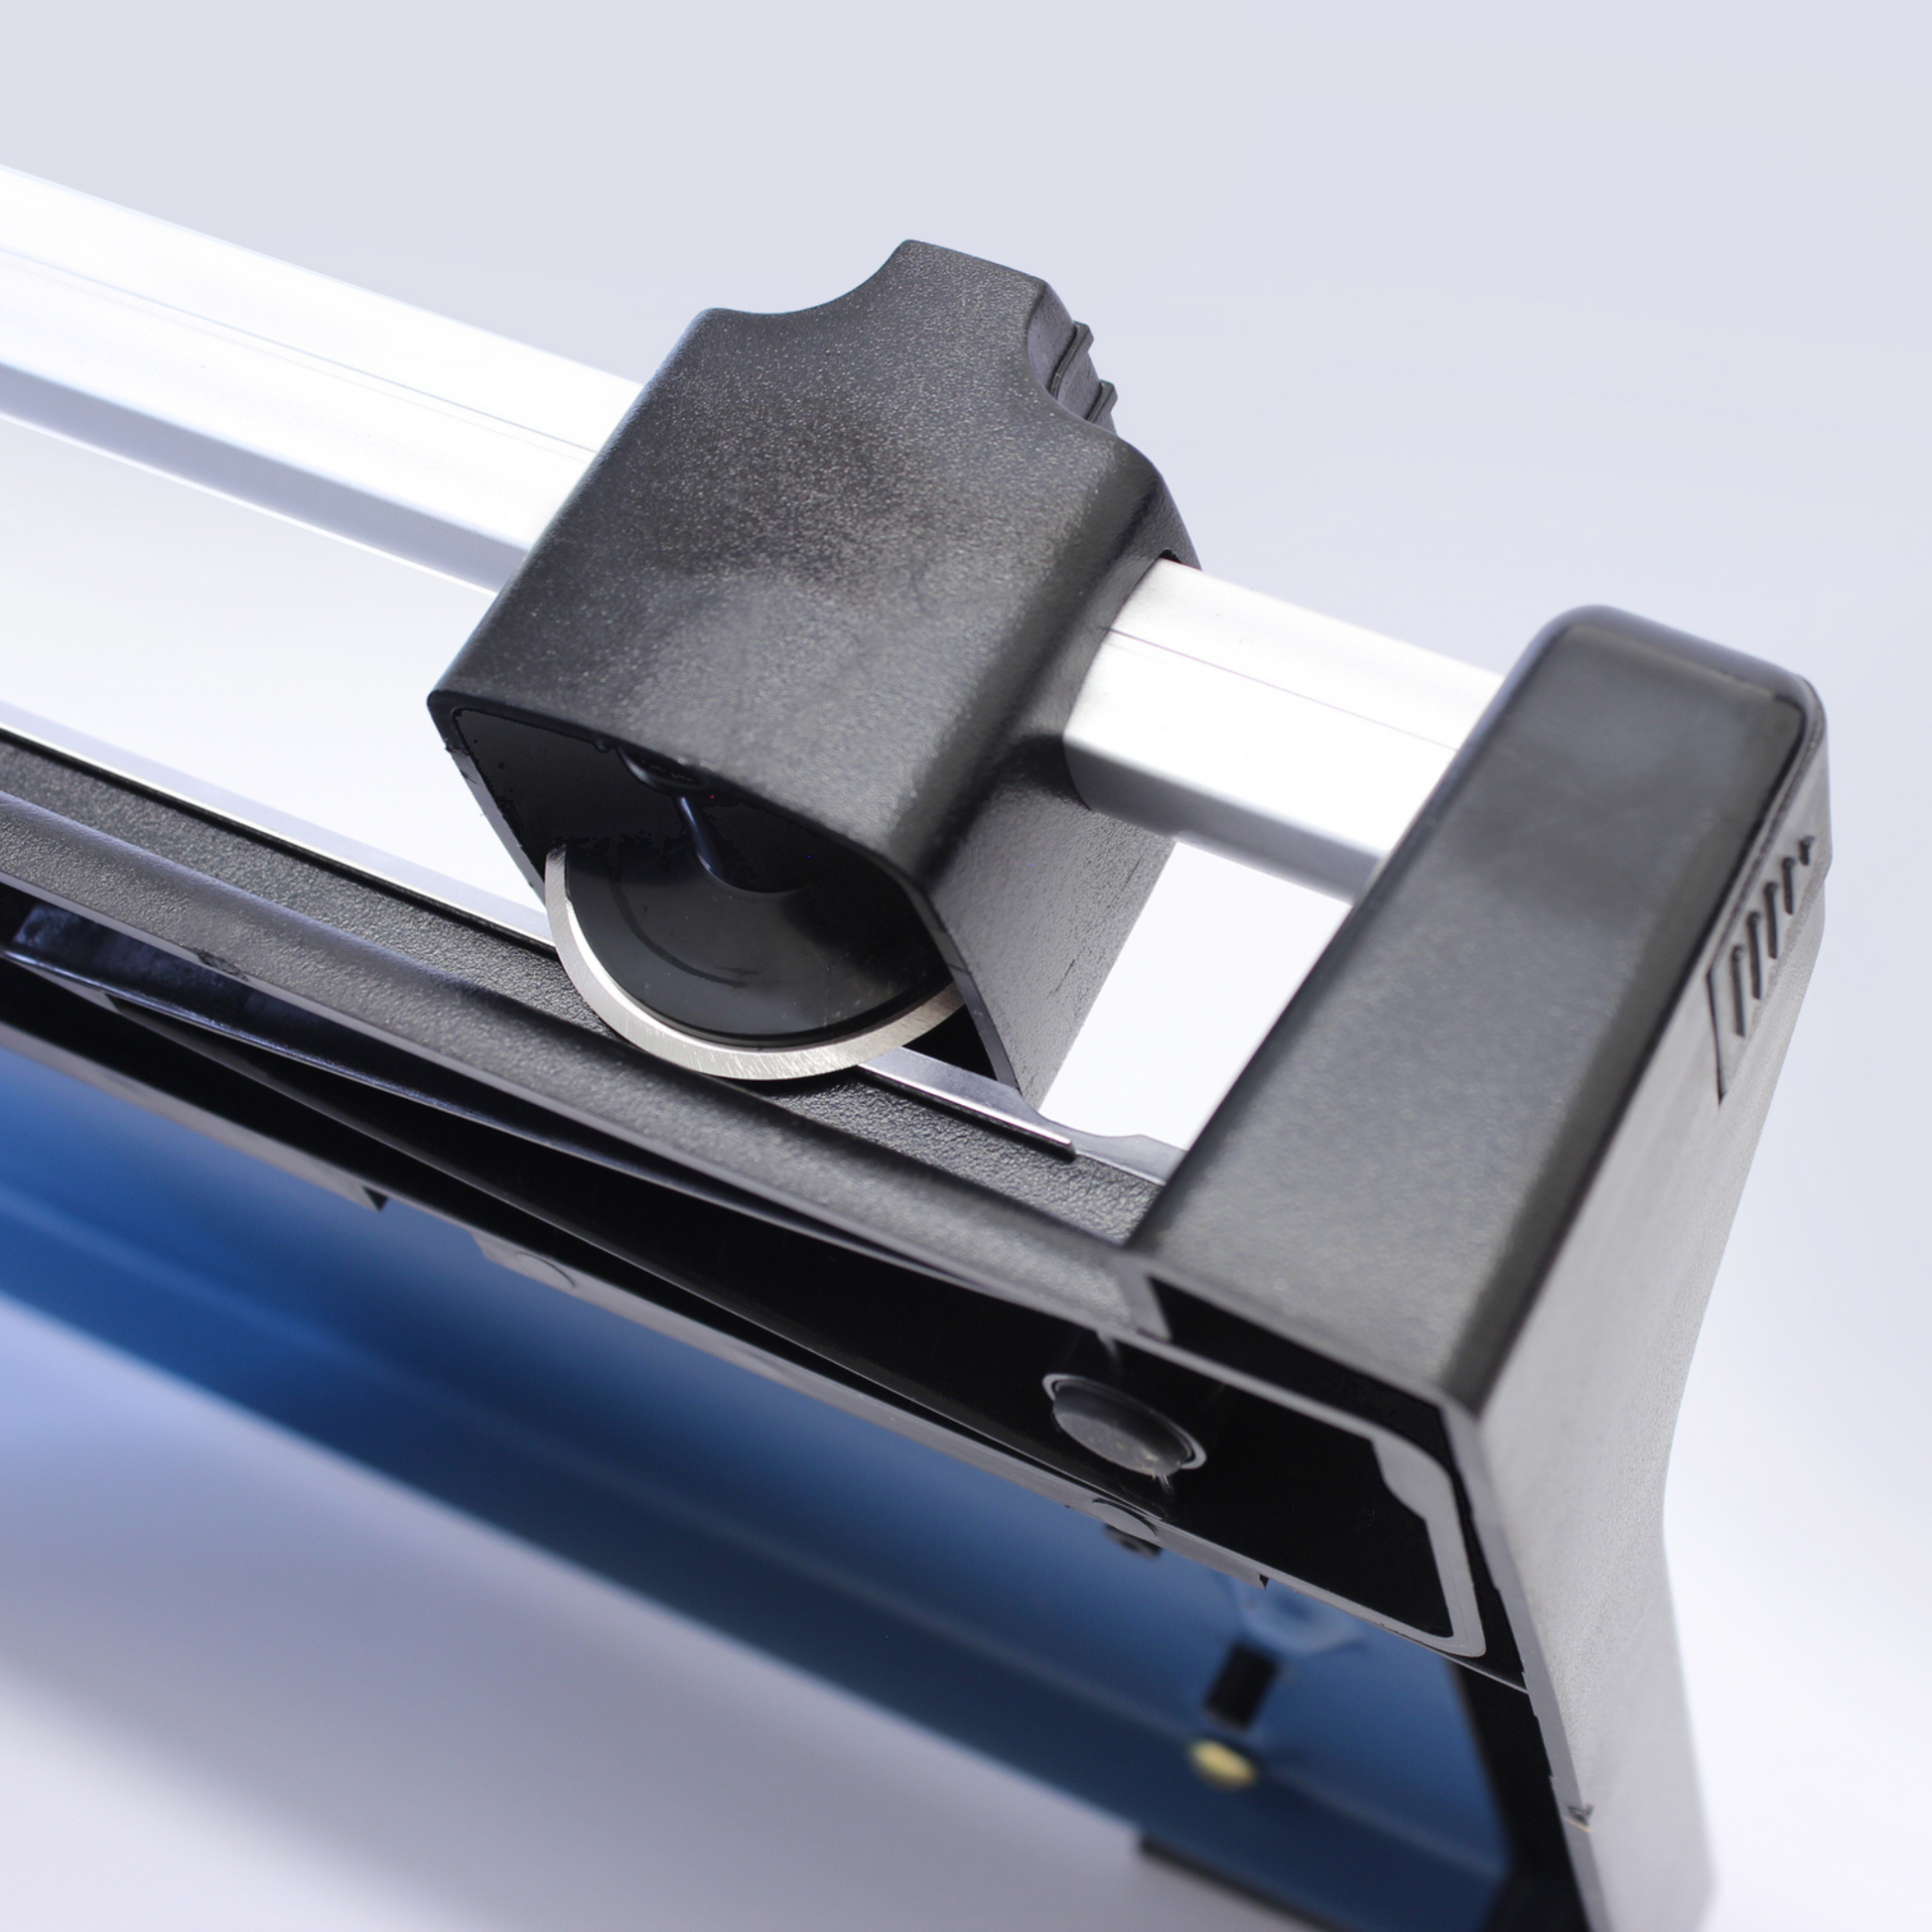 A close view of the cutting head on an A4 rotary paper trimmer, featuring a textured black handle for a secure grip and the round blade that ensures clean cuts, with a glimpse of the blue metal base for stability.